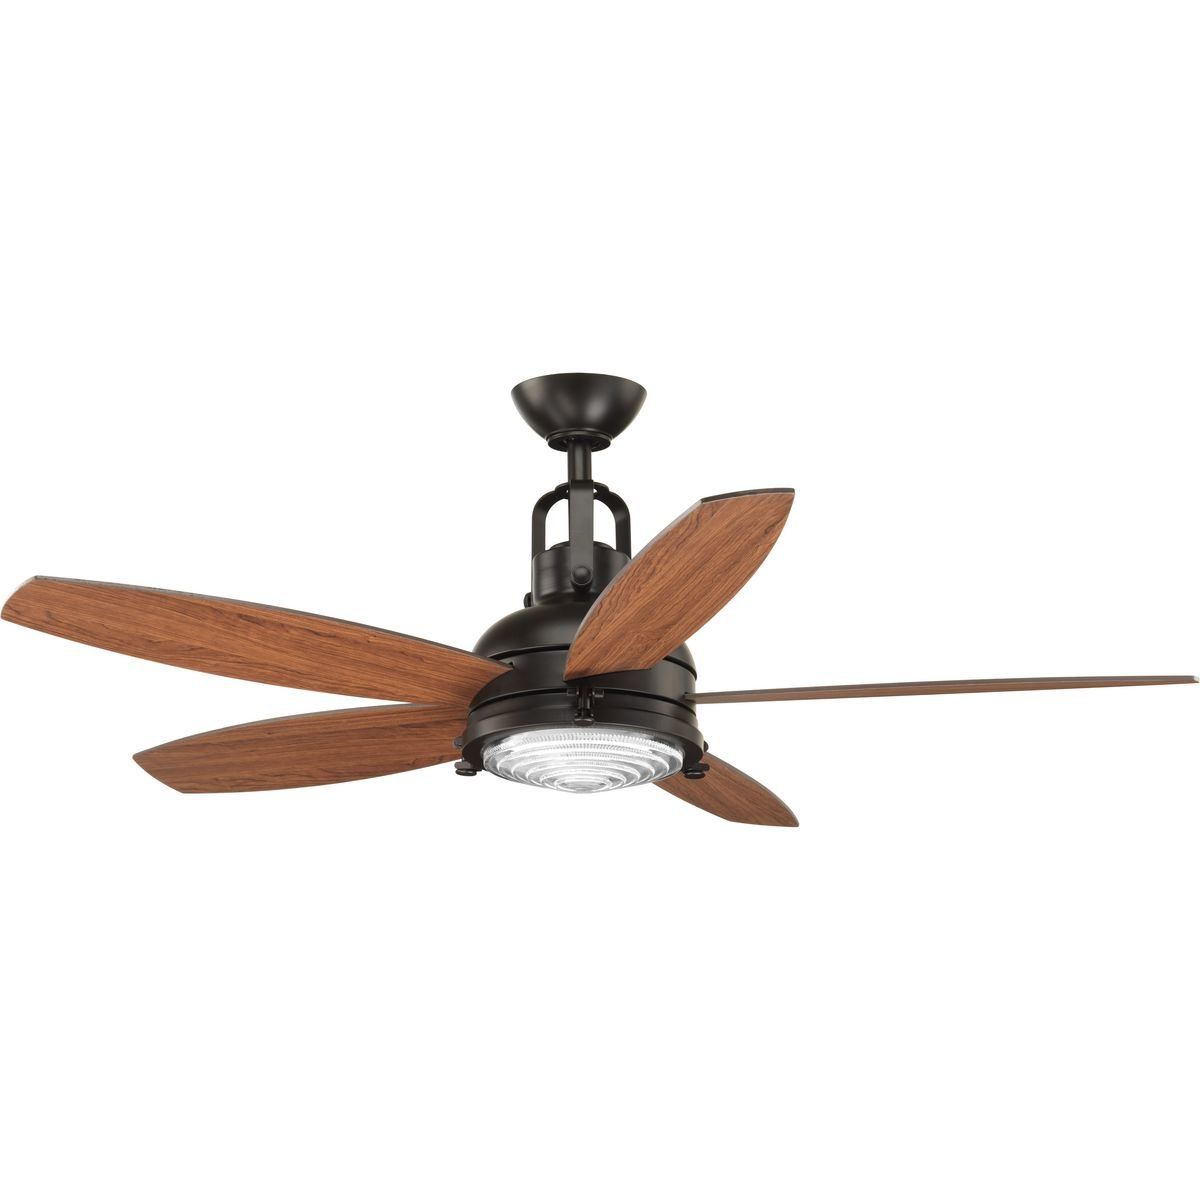 Gehlert 5 Blade Led Ceiling Fan With Remote In Trendy Sudie 5 Blade Led Ceiling Fans (View 10 of 20)